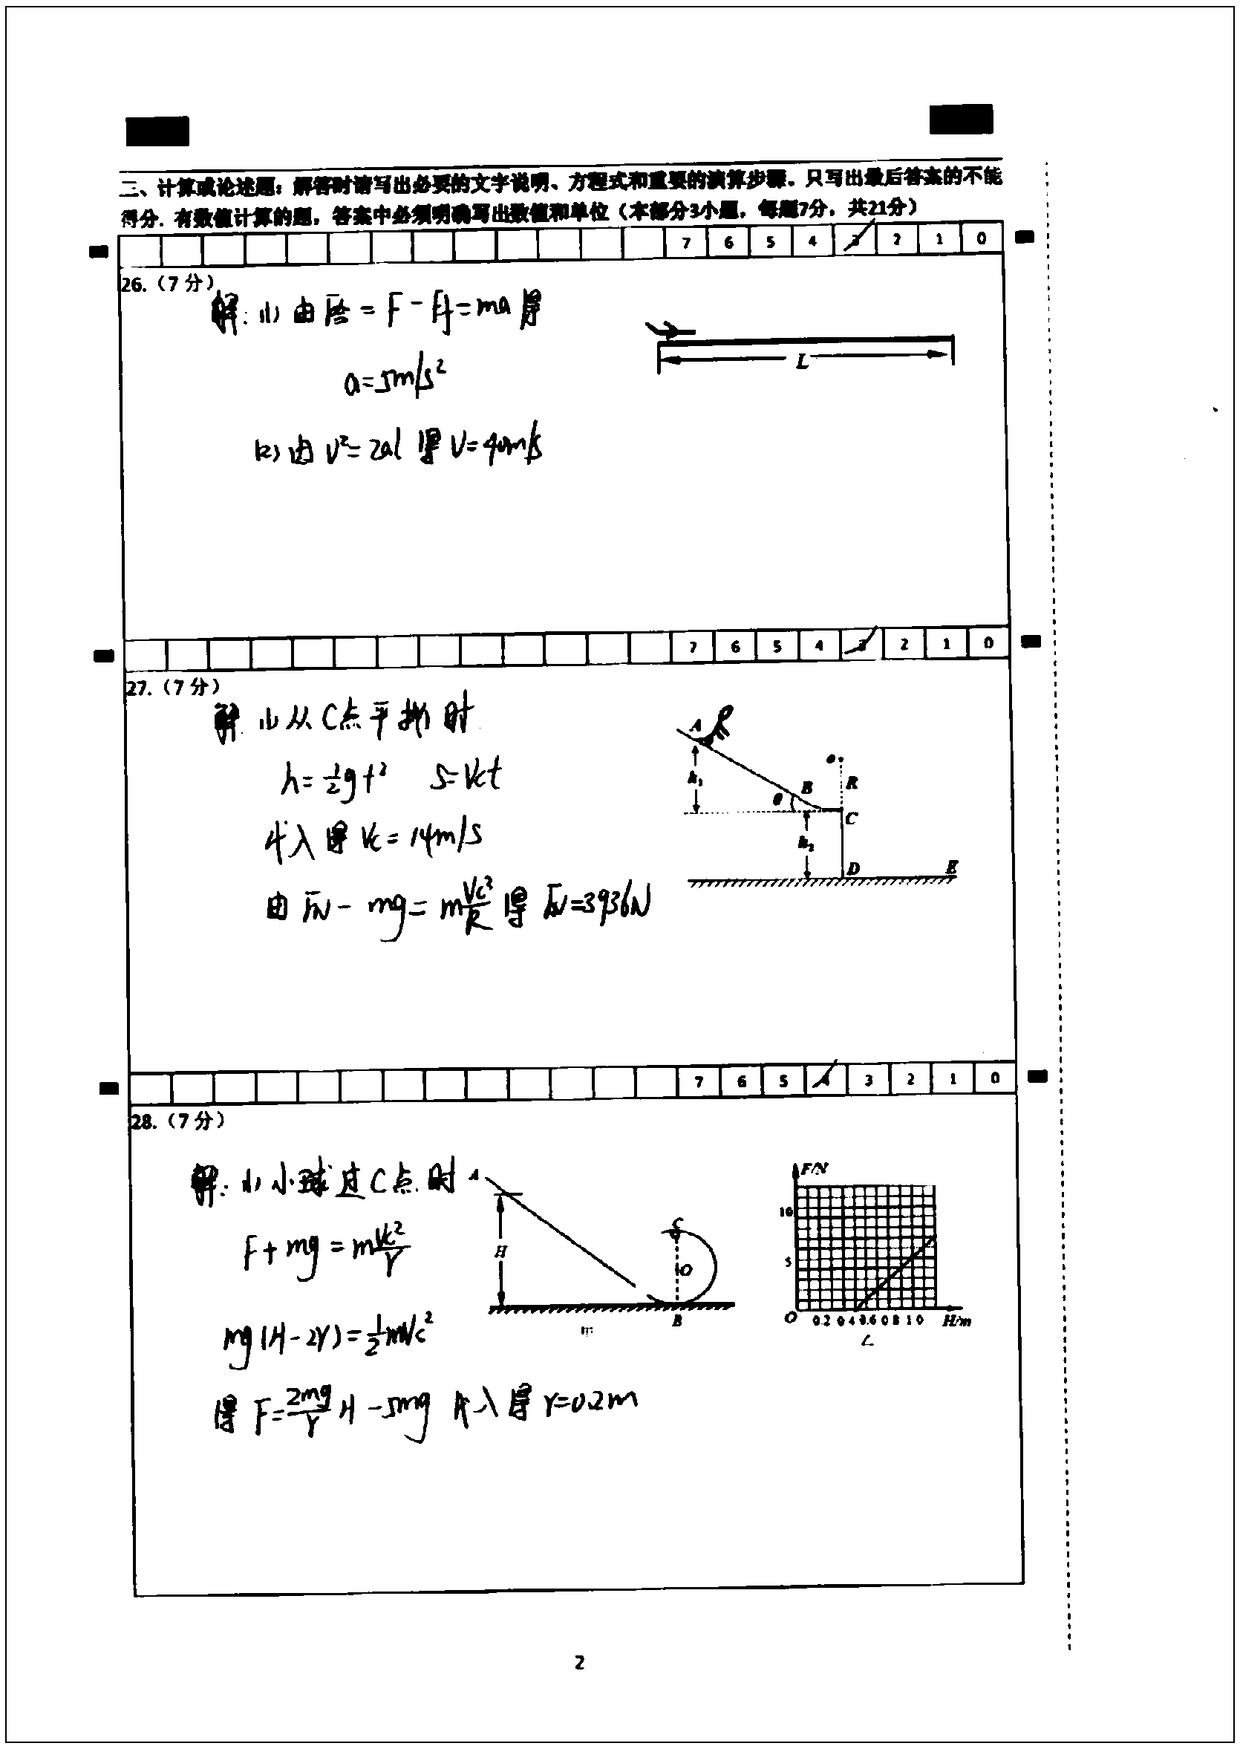 An answer card scoring method based on image recognition